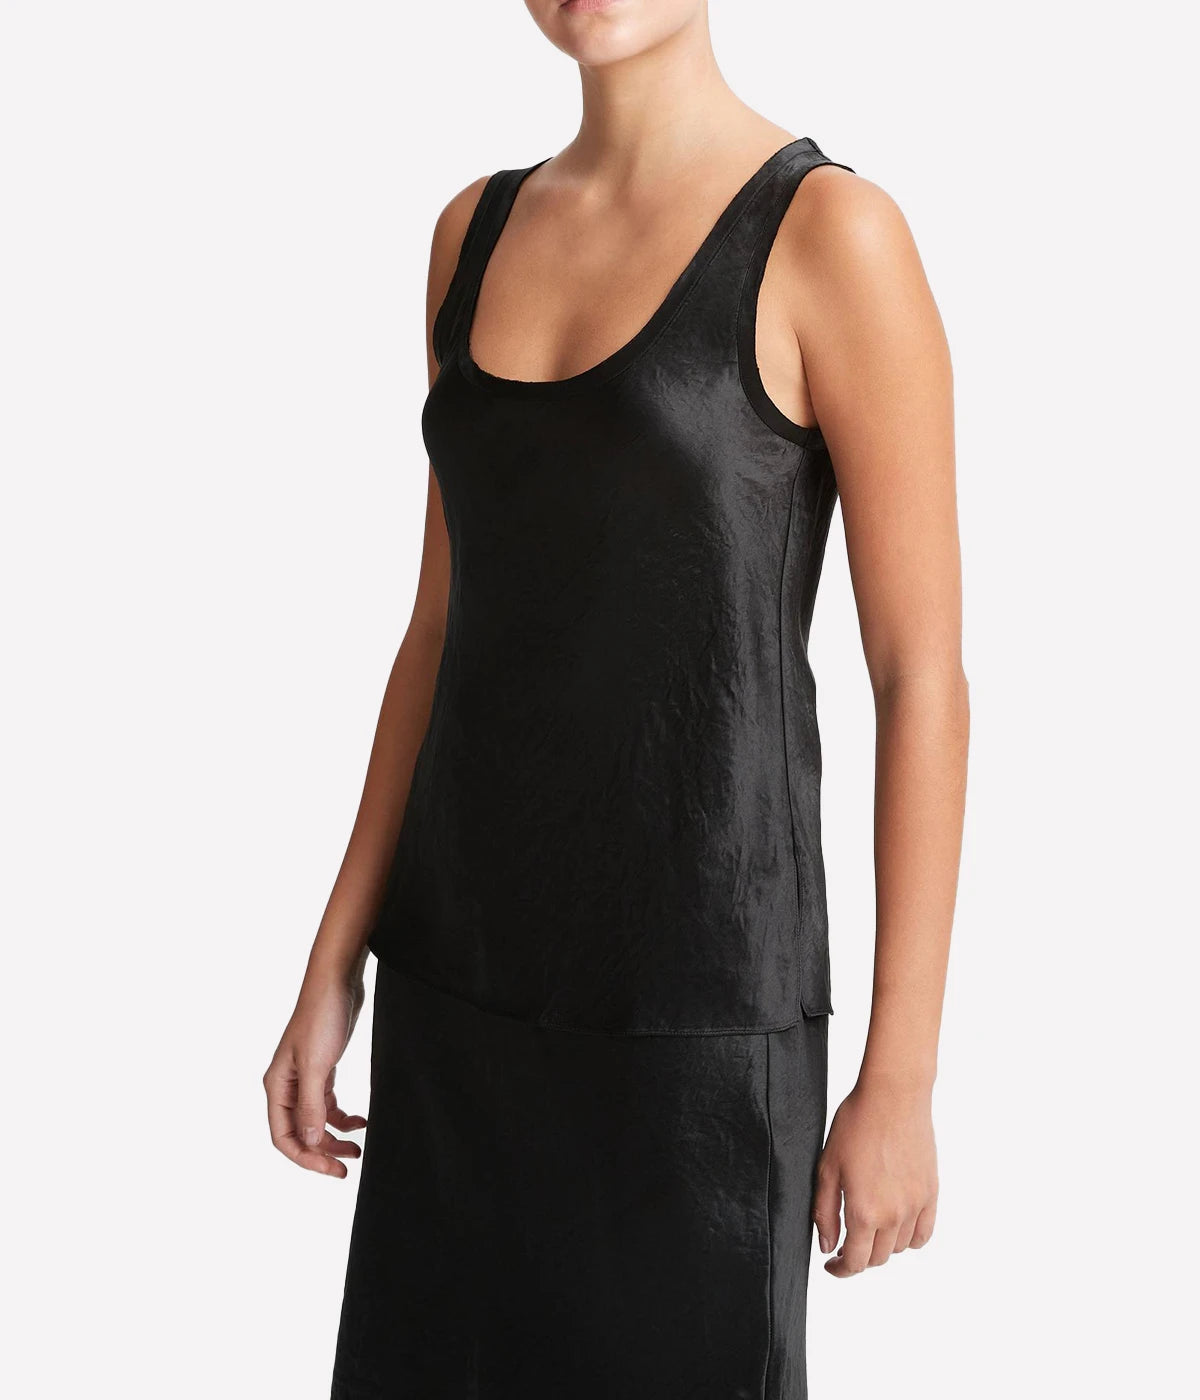 An edgy take on a silky black tank, this sleeveless black Vince tank is a versatile top. Wear this bra-friendly top with your favourite skirt or pants to your next event, or every day. 